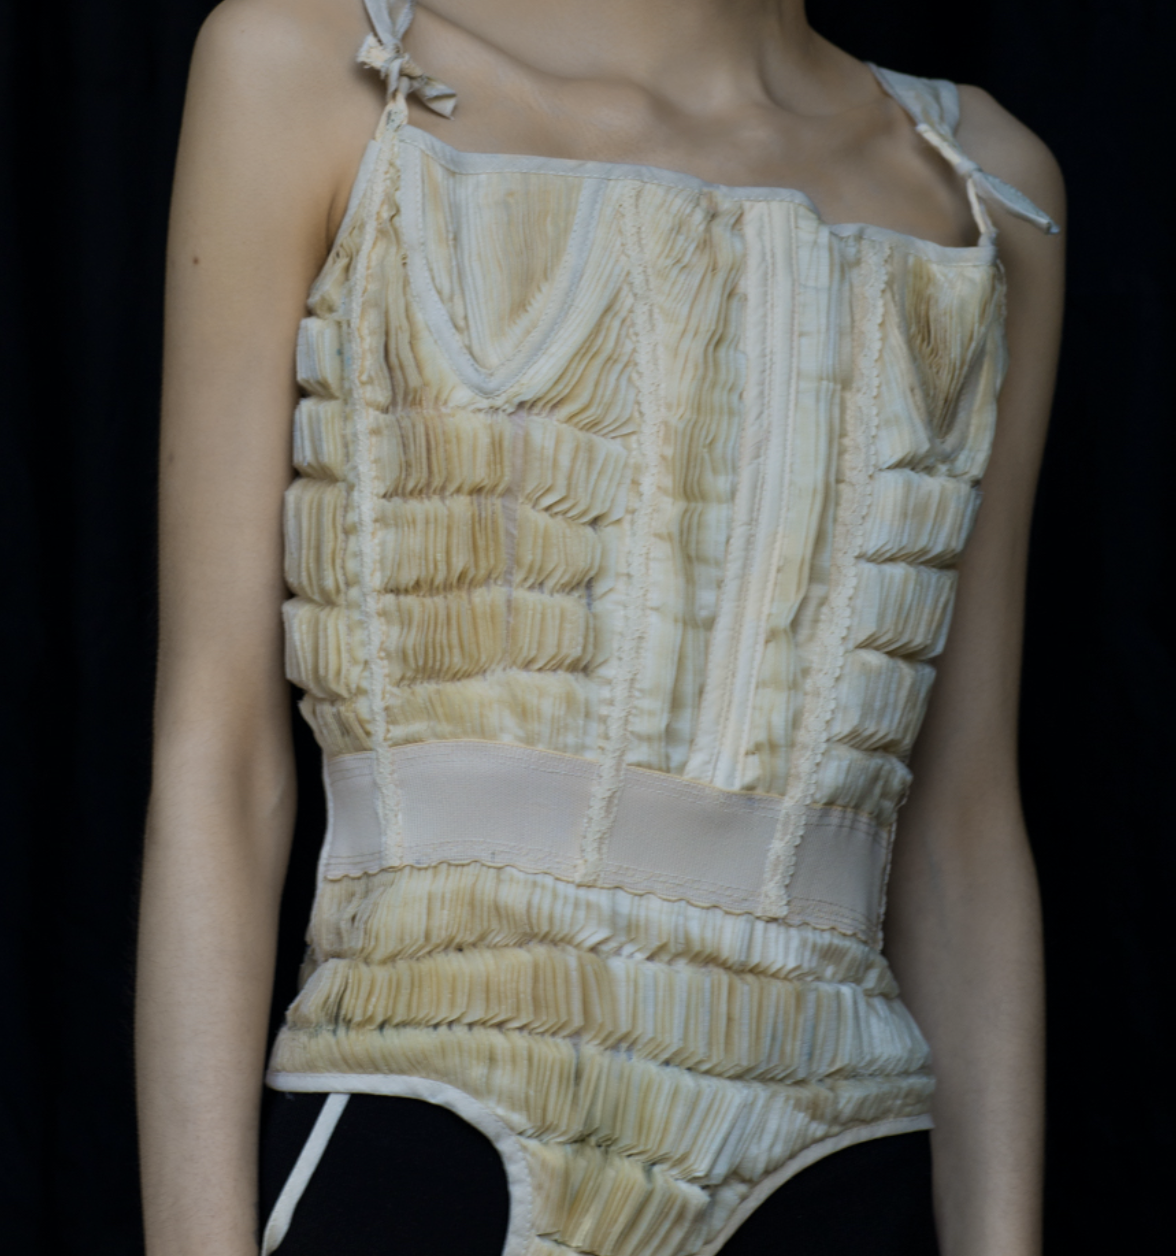 How to style corset with elegance and confidence, Gallery posted by  iammarina.zl